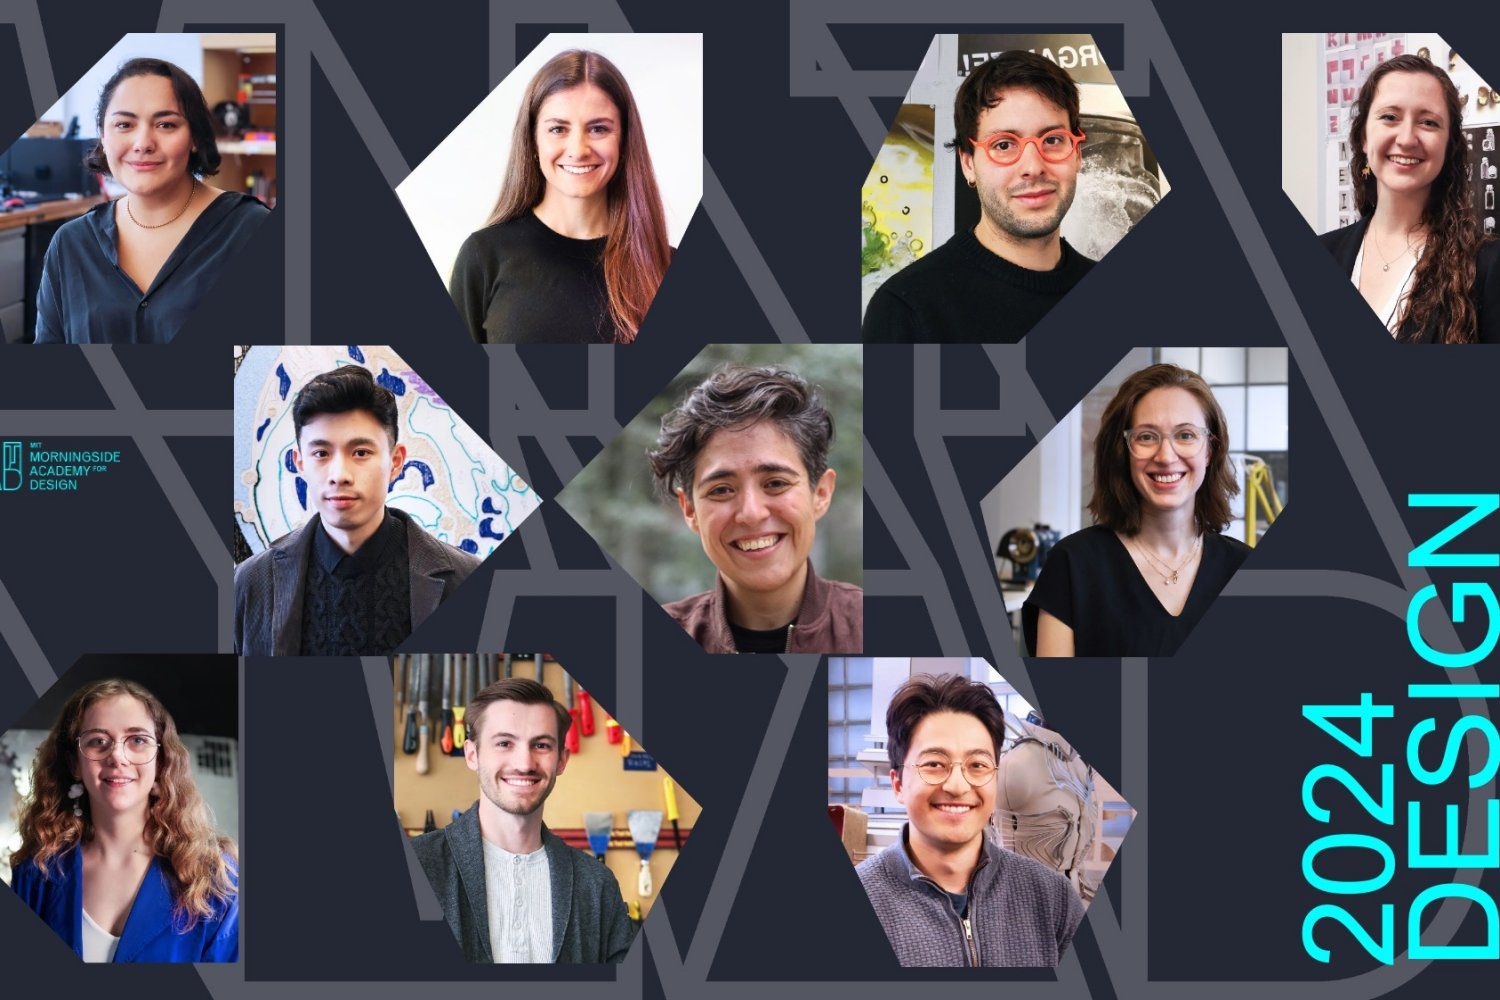 Pulling from different corners of design, the Design Fellows supported by the MIT Morningside Academy for Design explore solutions in fields such as sustainability, health, architecture, urban planning, social justice, and education. 